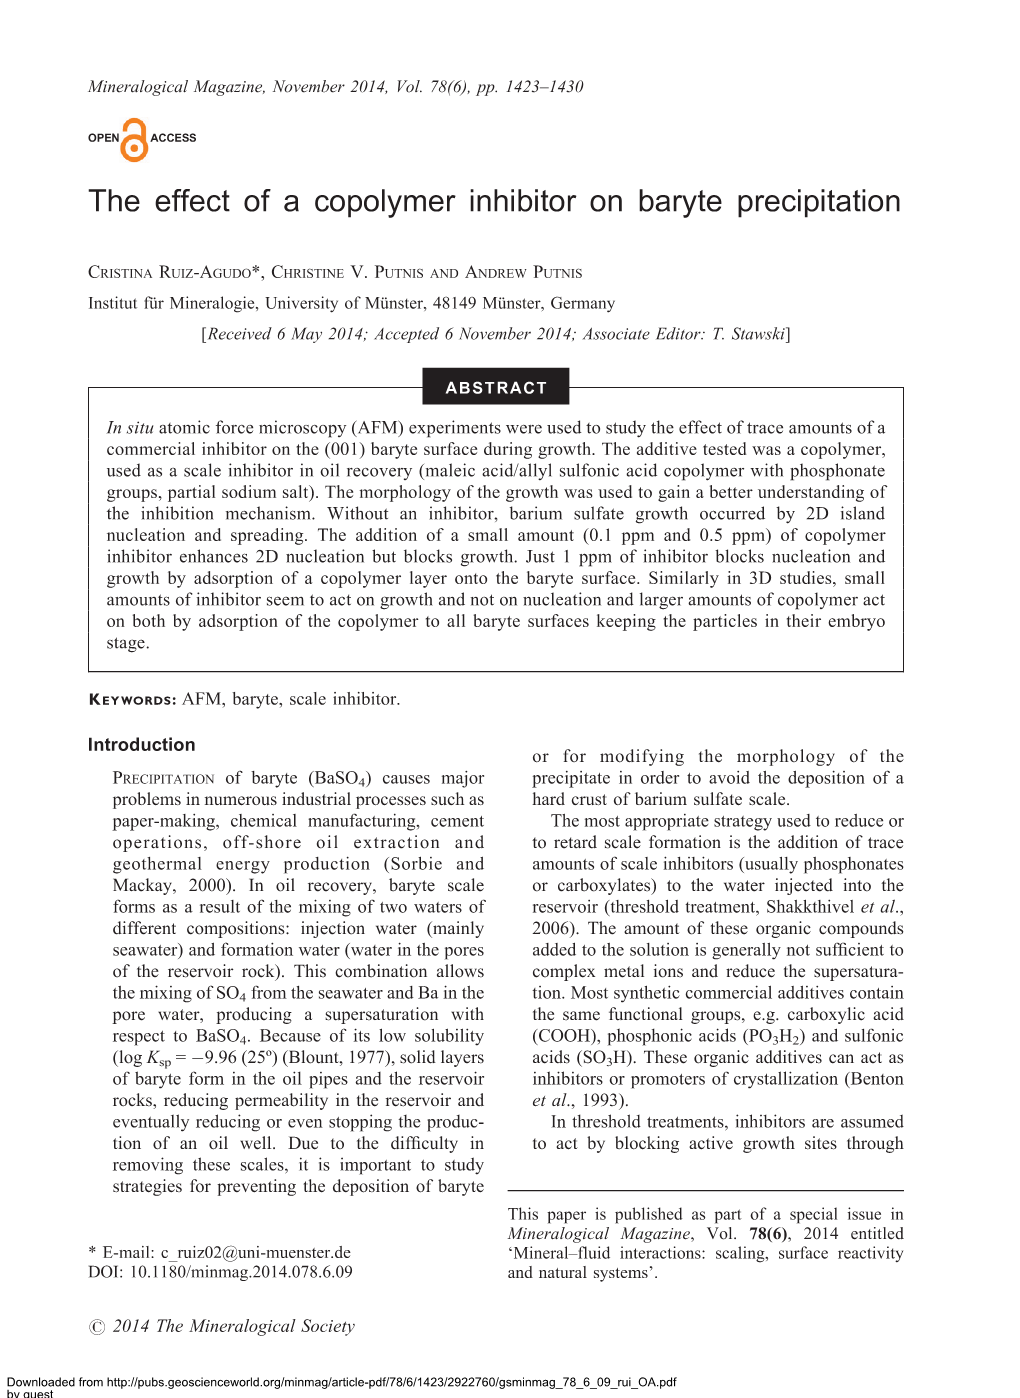 The Effect of a Copolymer Inhibitor on Baryte Precipitation